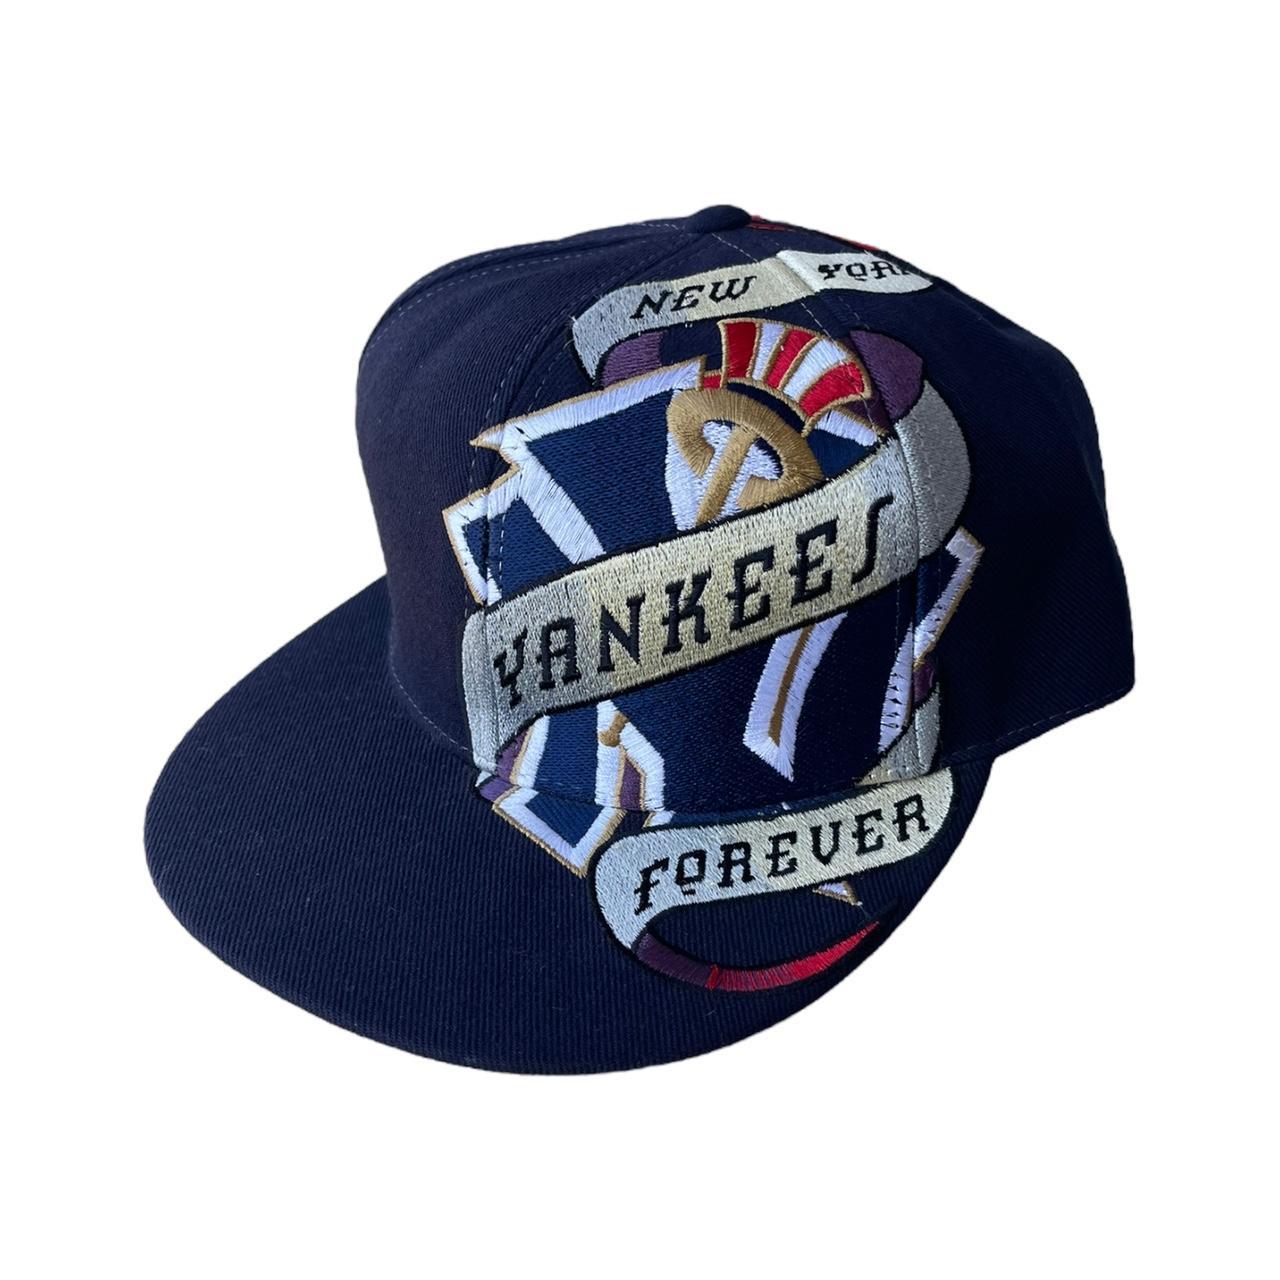 New York Yankees Cooperstown Collection caps and 140 styles by